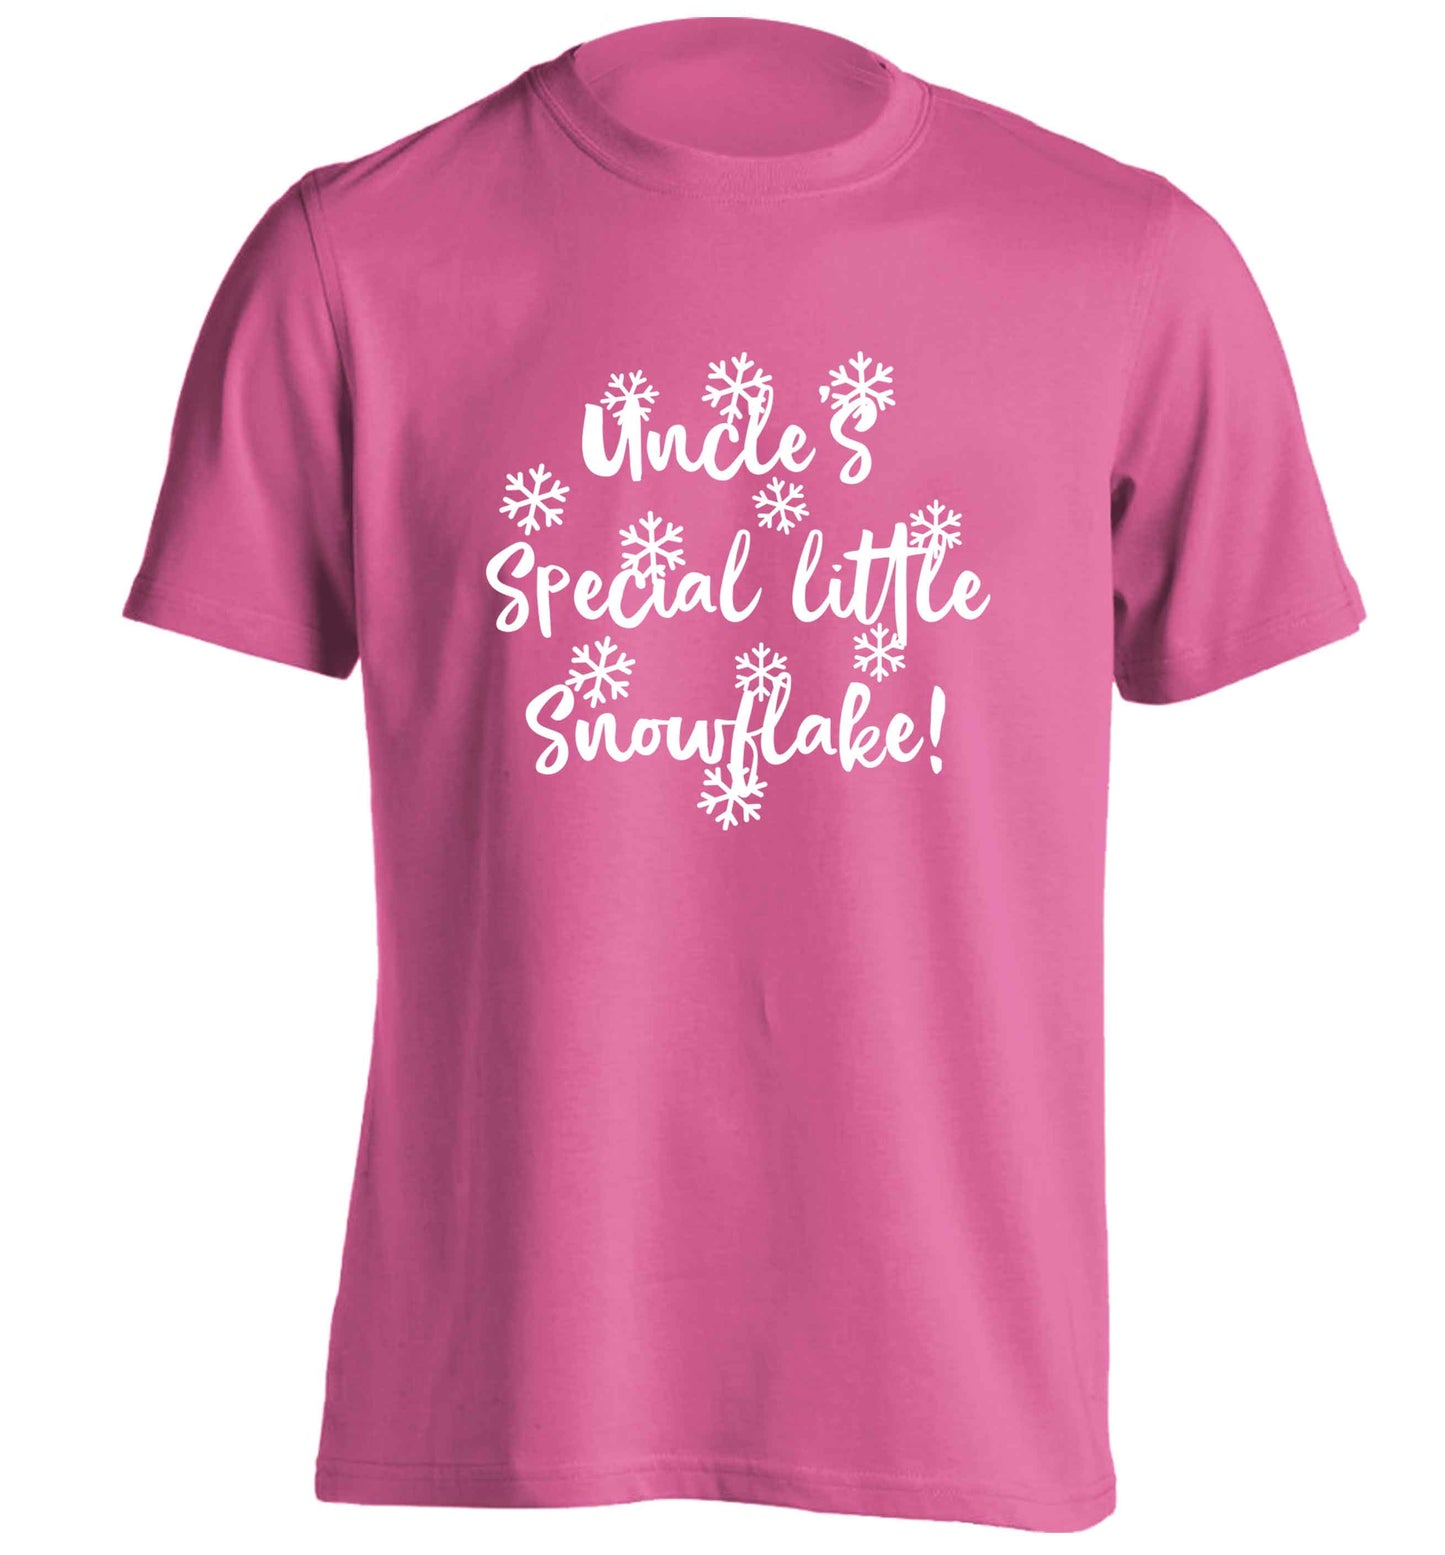 Uncle's special little snowflake adults unisex pink Tshirt 2XL